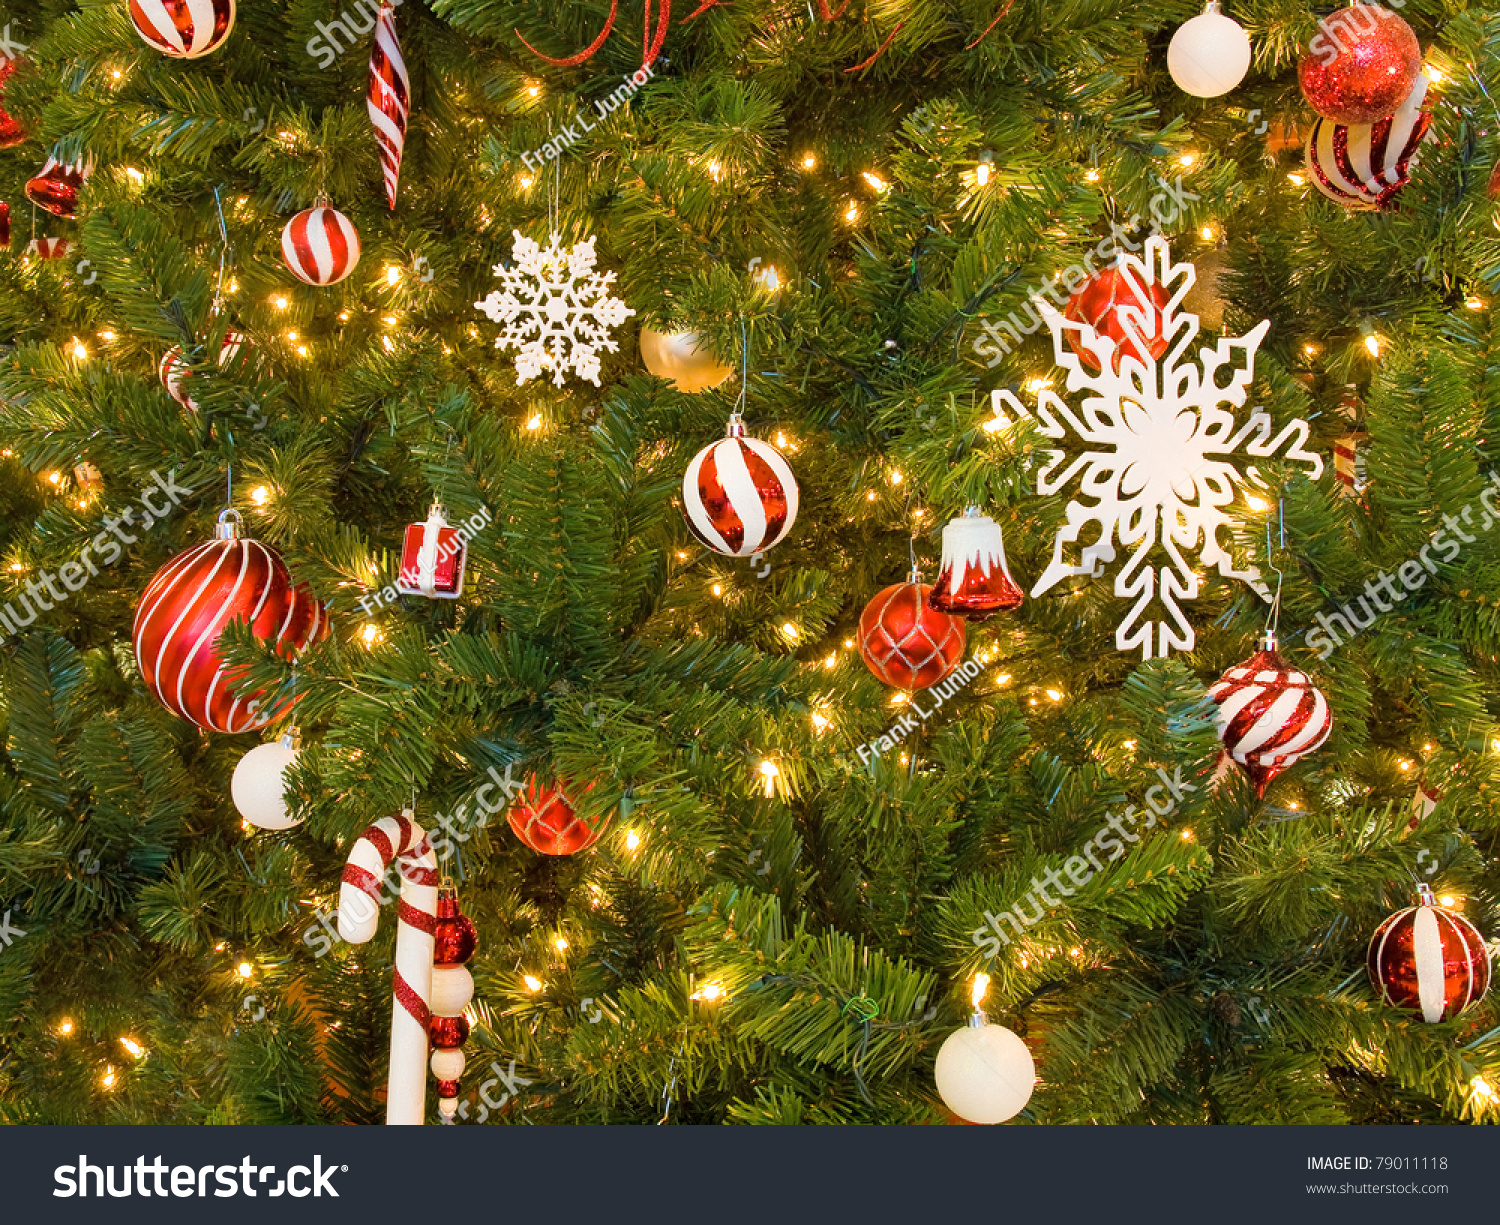 Red And White Christmas Ornaments On A Green Tree With White Lights Stock Photo 79011118 ...